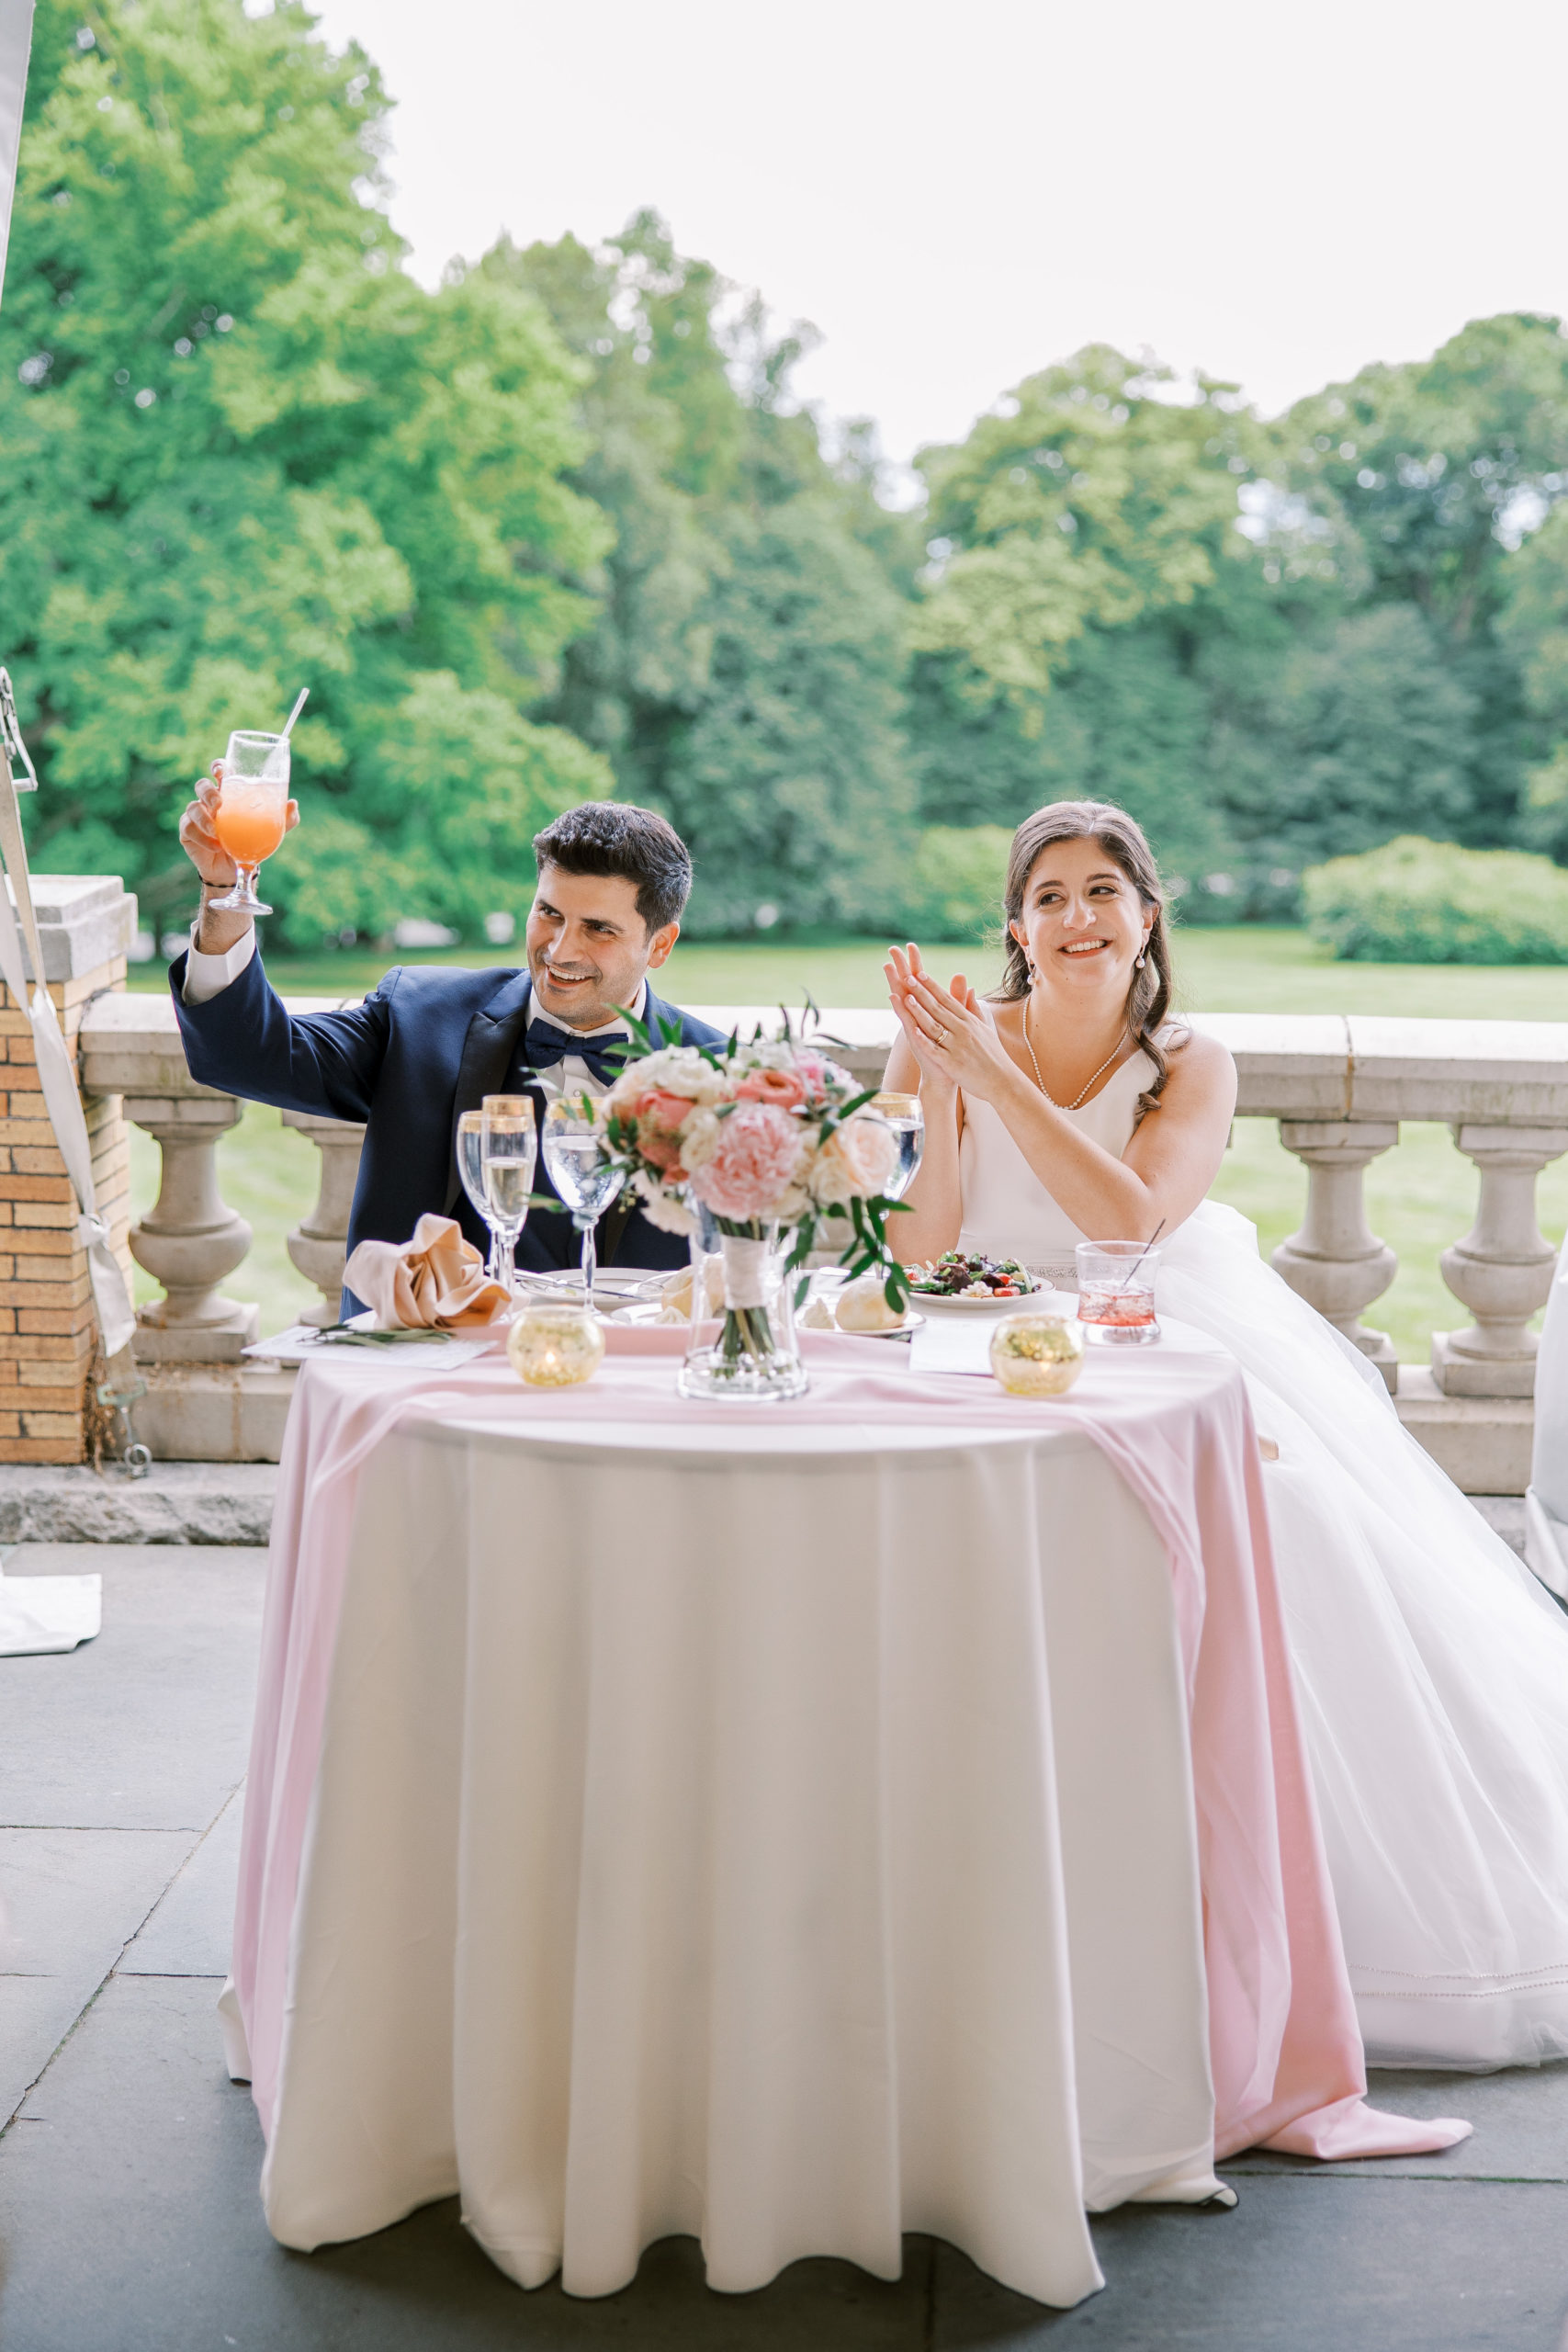 Groom holds up drink and bride claps sitting at their table during wedding reception for Cairnwood Estate Wedding Photography